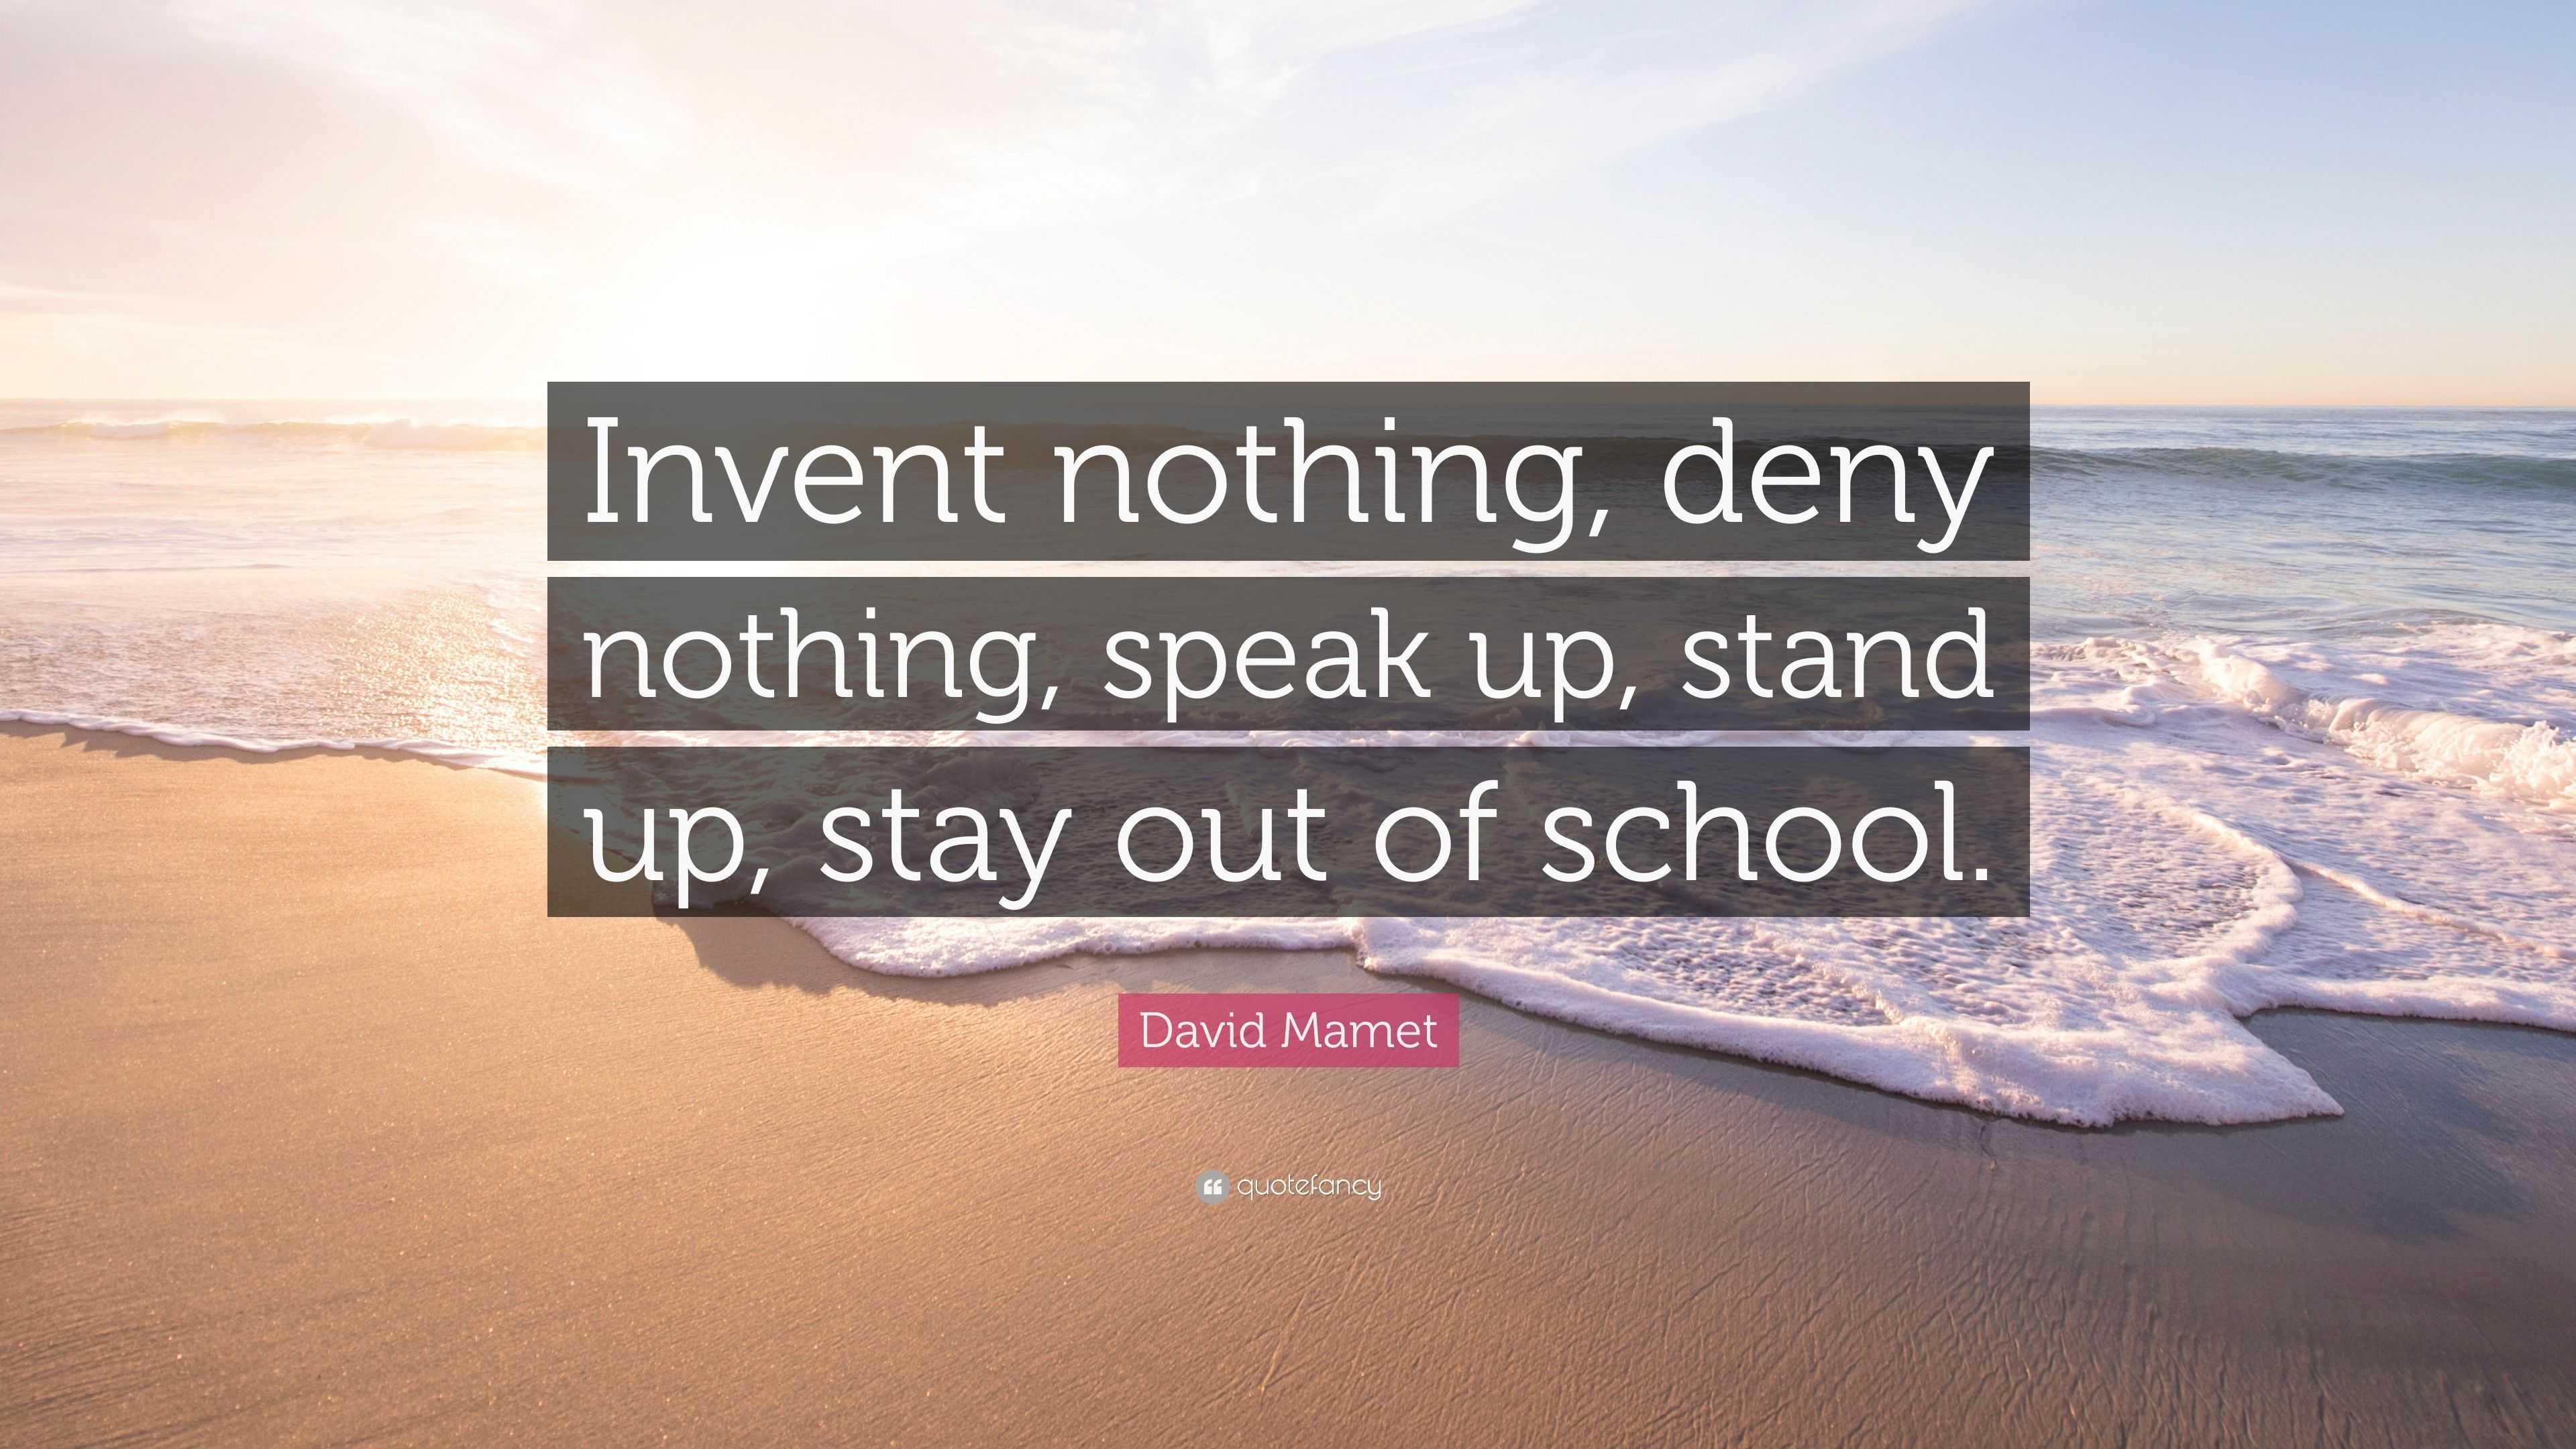 David Mamet Quote: “Invent nothing, deny nothing, speak up, stand up ...